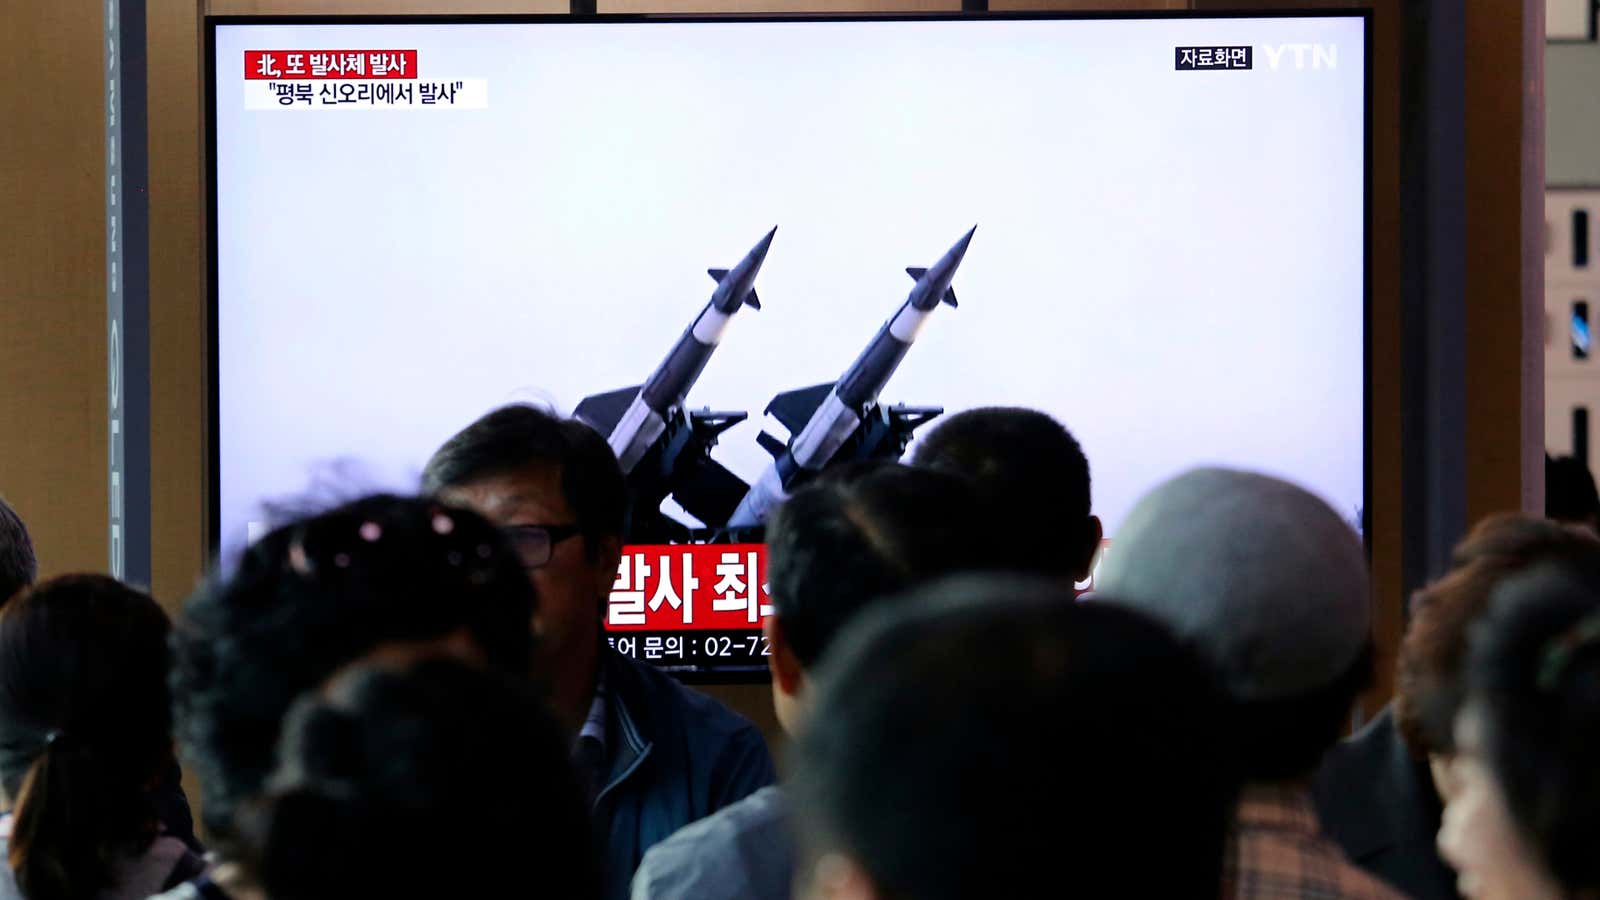 A South Korean news broadcast shows missiles used by North Korea.